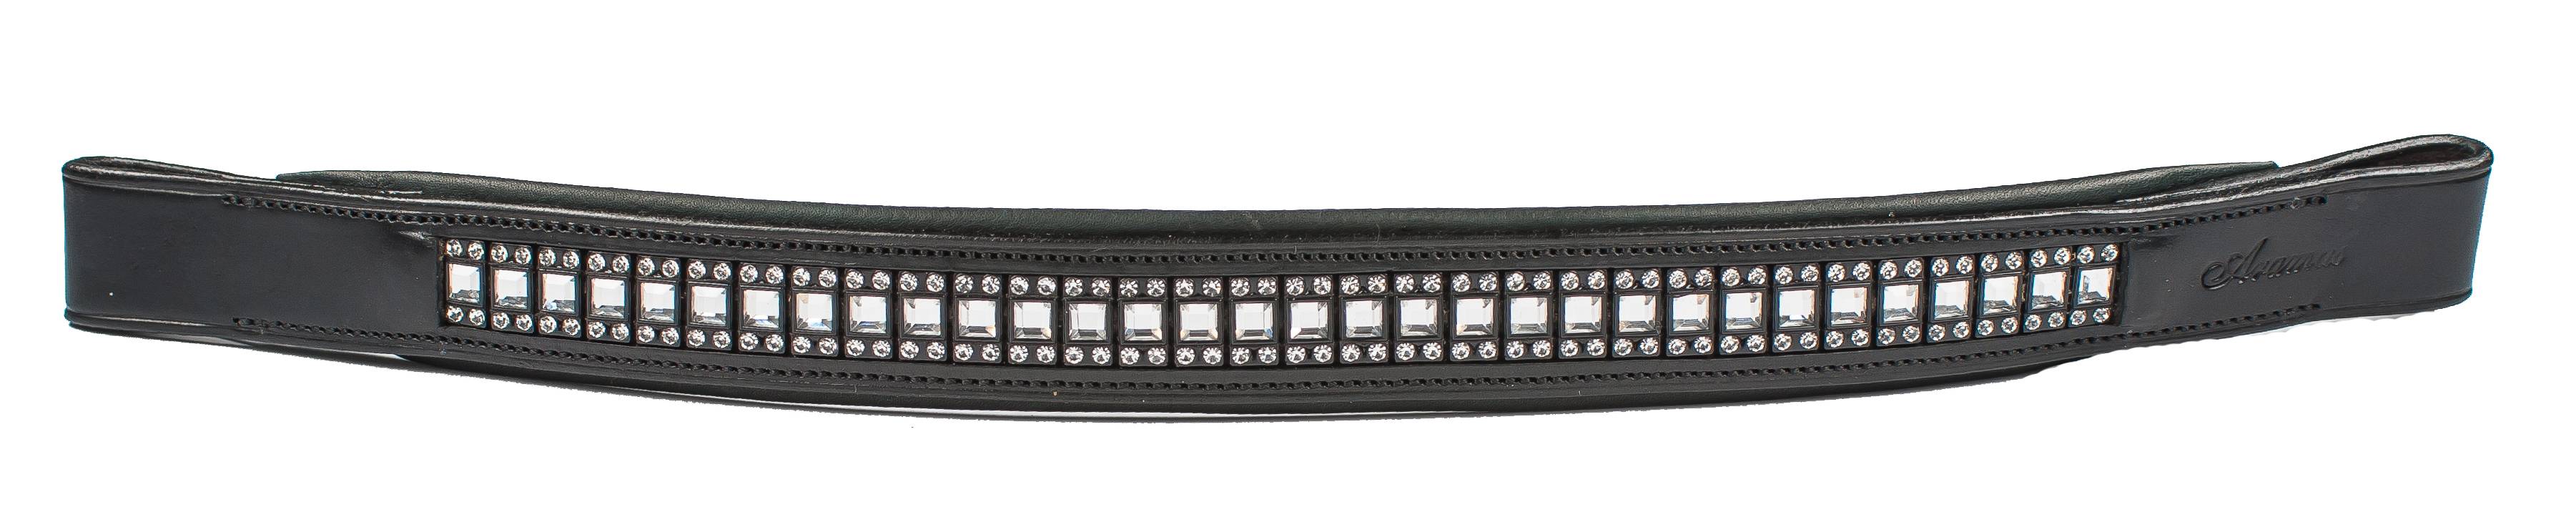 Aramas Queen Padded 1 Inch Wide Browband with Swarovski Crystals